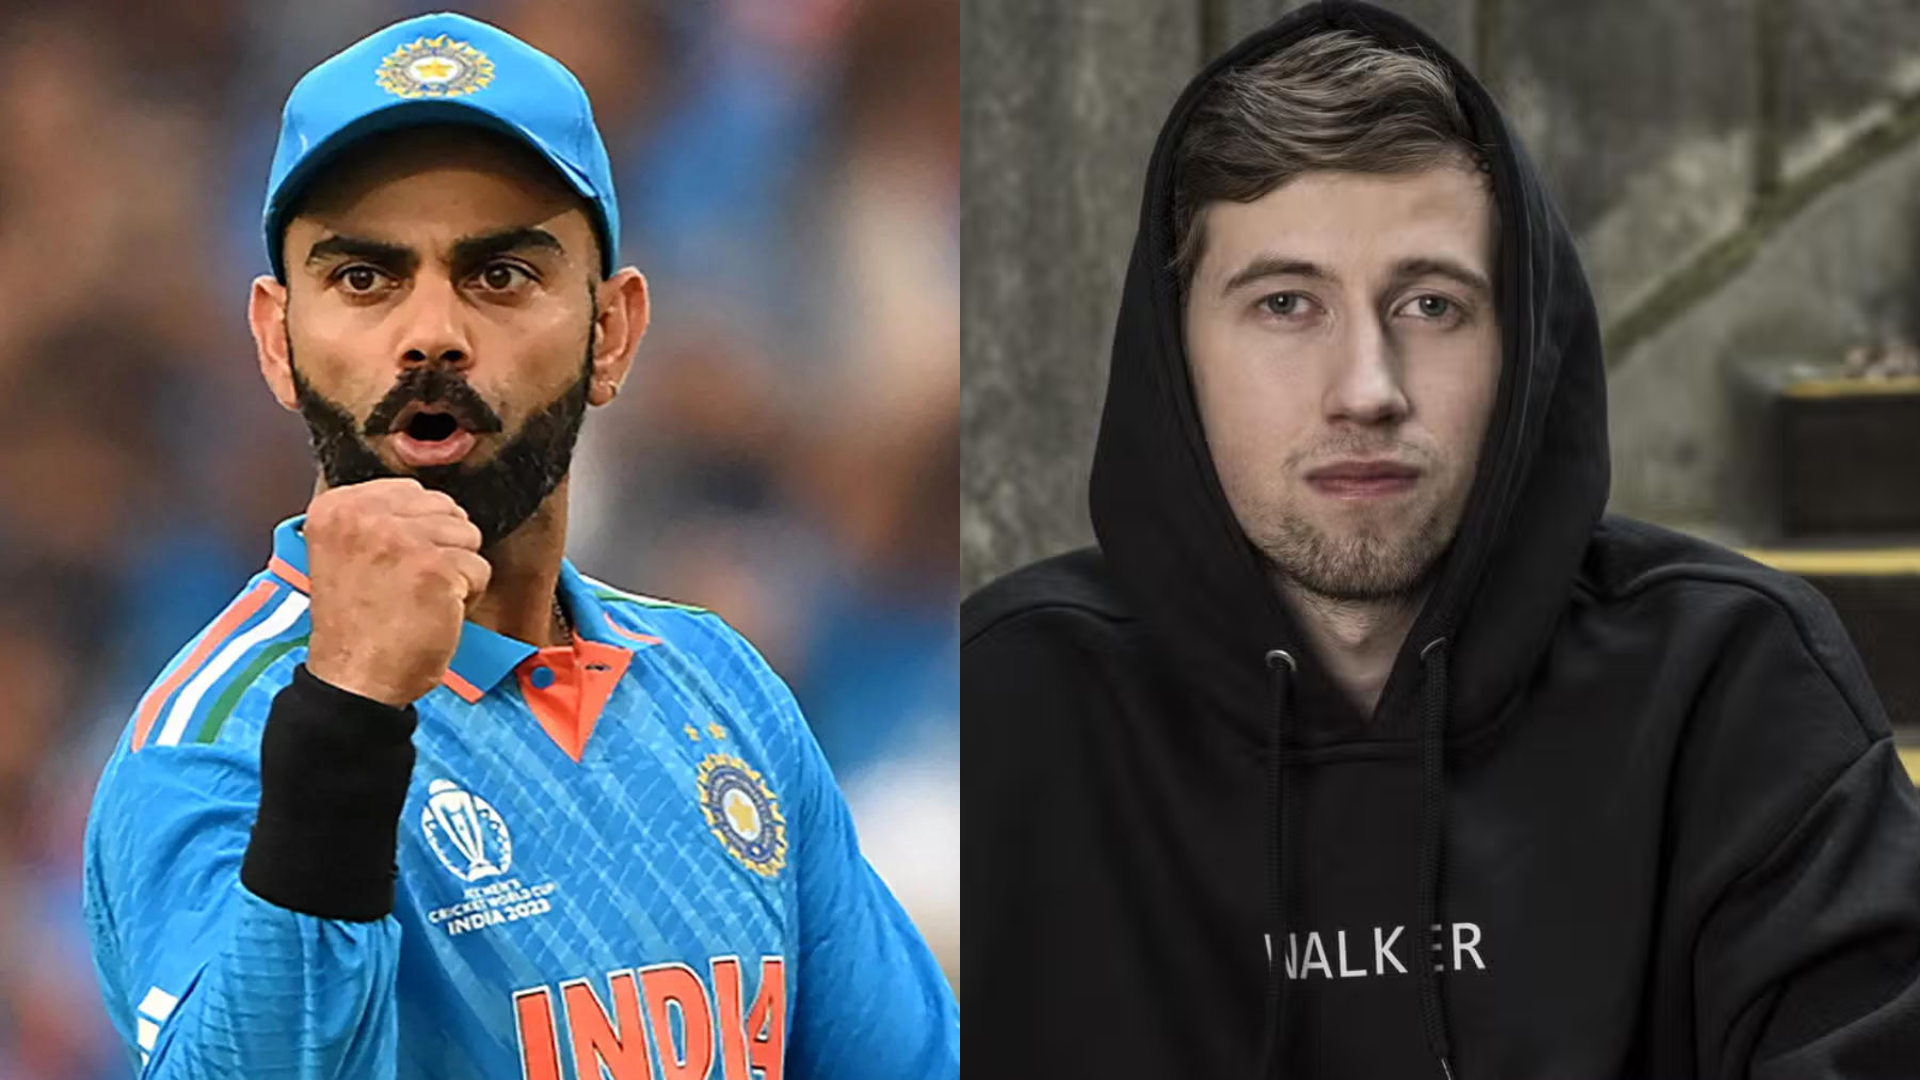 Virat Kohli Quickly Corrects DJ Alan Walker As The Musician Congratulates Him For Birth Of Daughter: “I Just Had A Son”